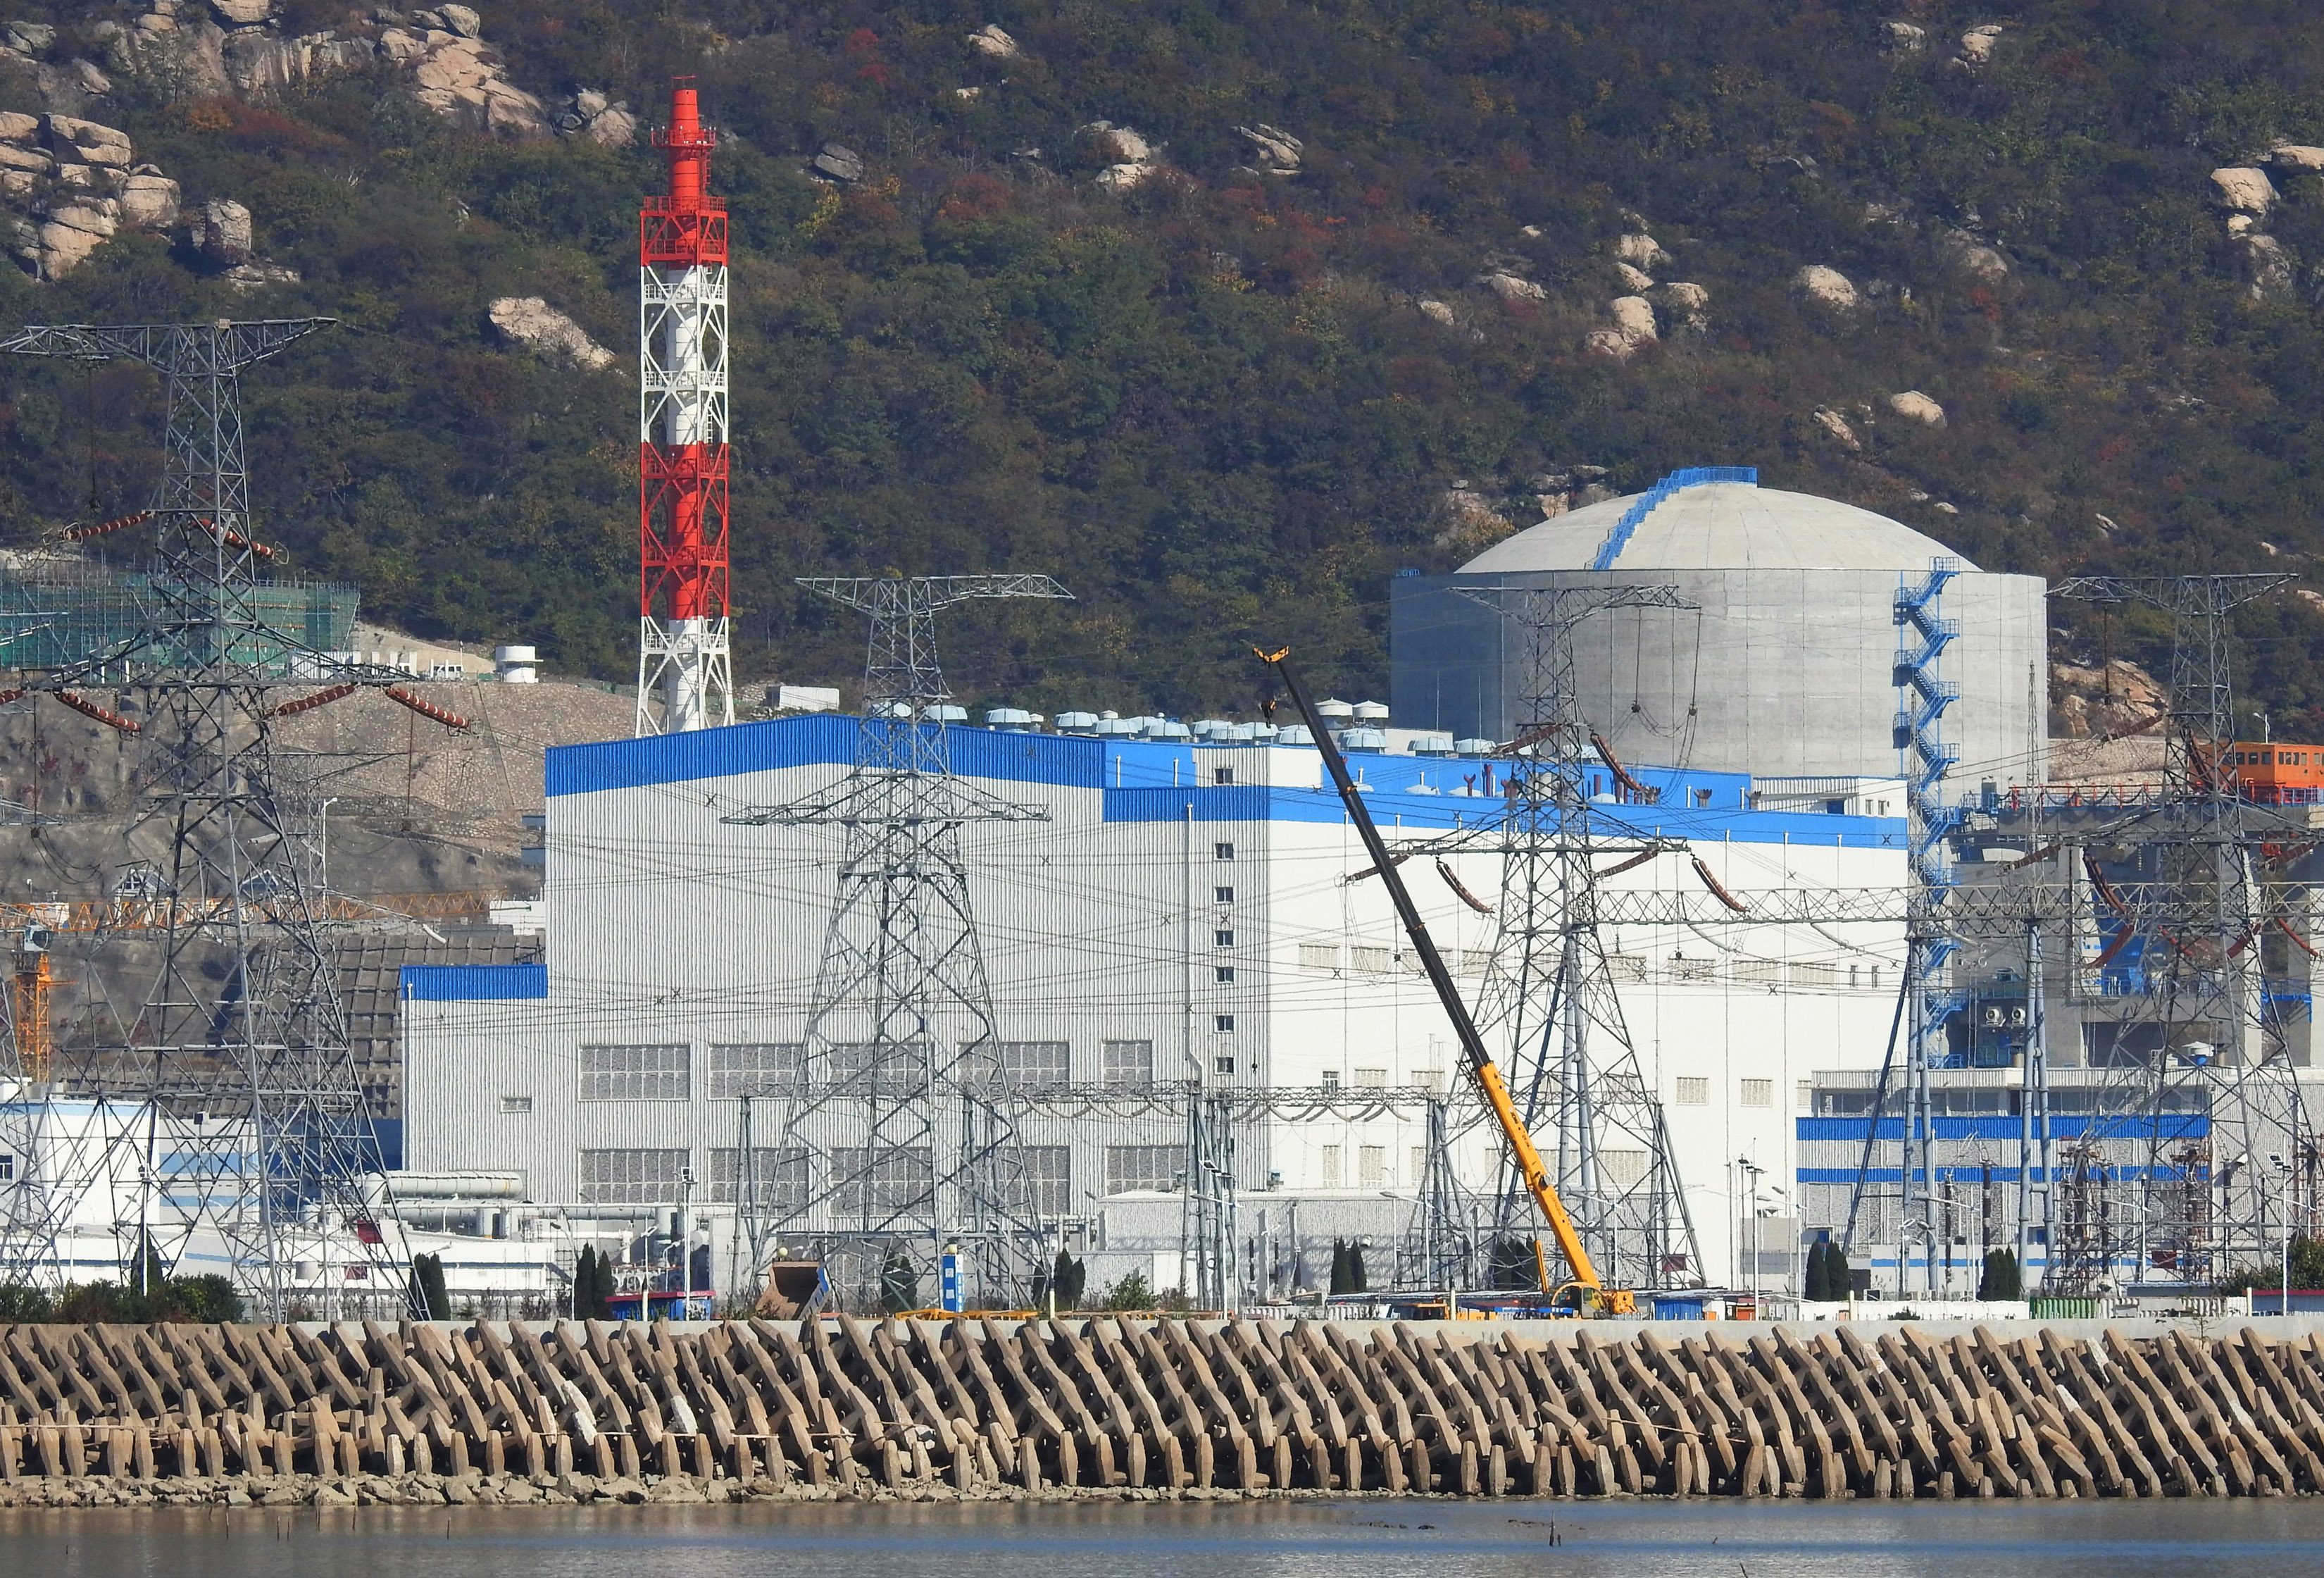 View of the Unit 4 reactor of Tianwan Nuclear Power Plant in Lianyungang